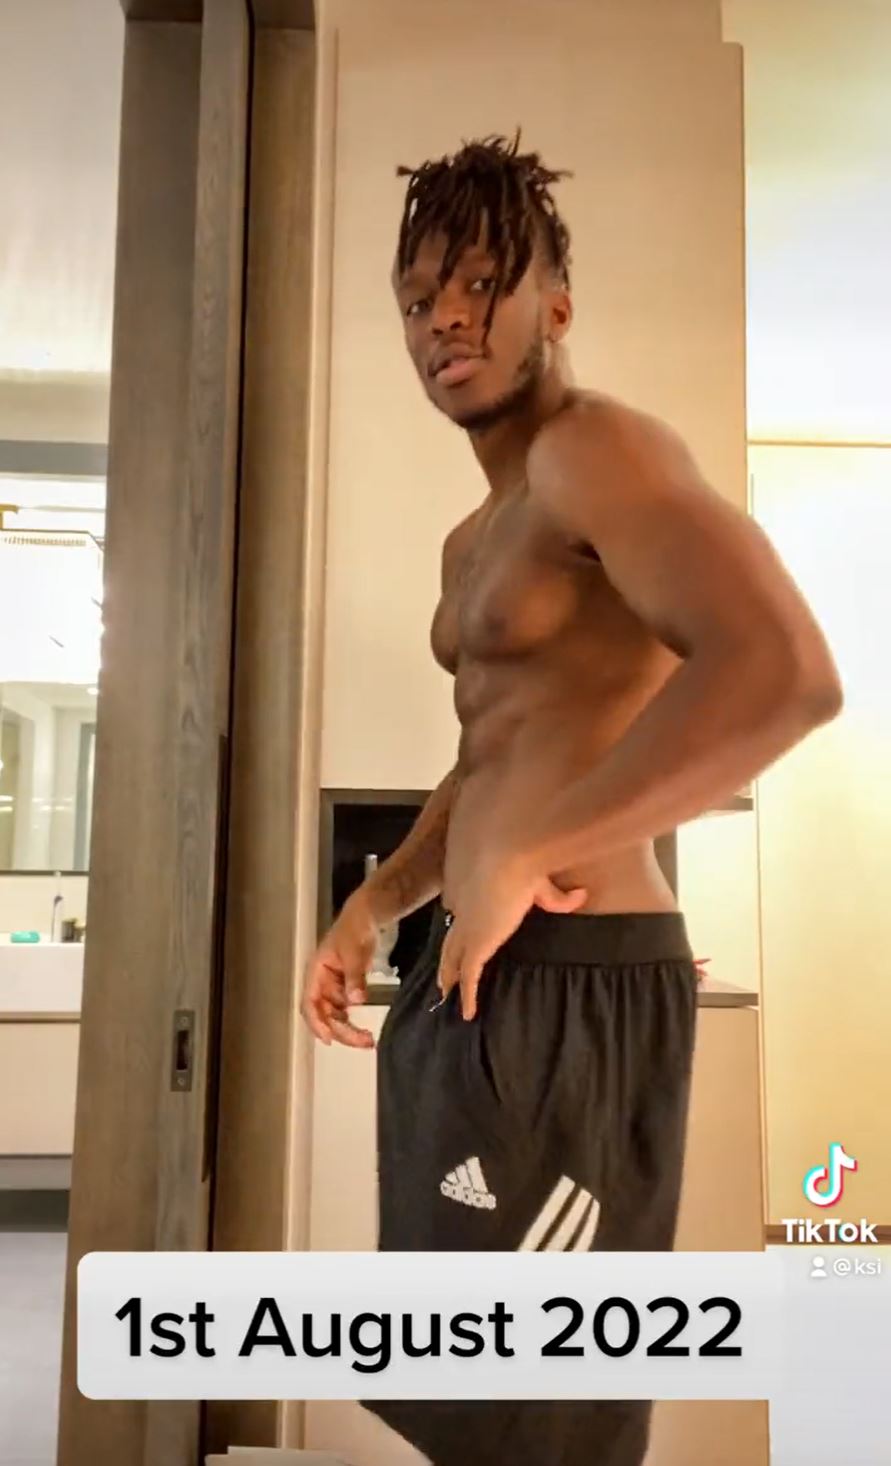 KSI showcases his amazing eight-month transformation after losing a lot of weight in preparation for the Alex Wassabi fight